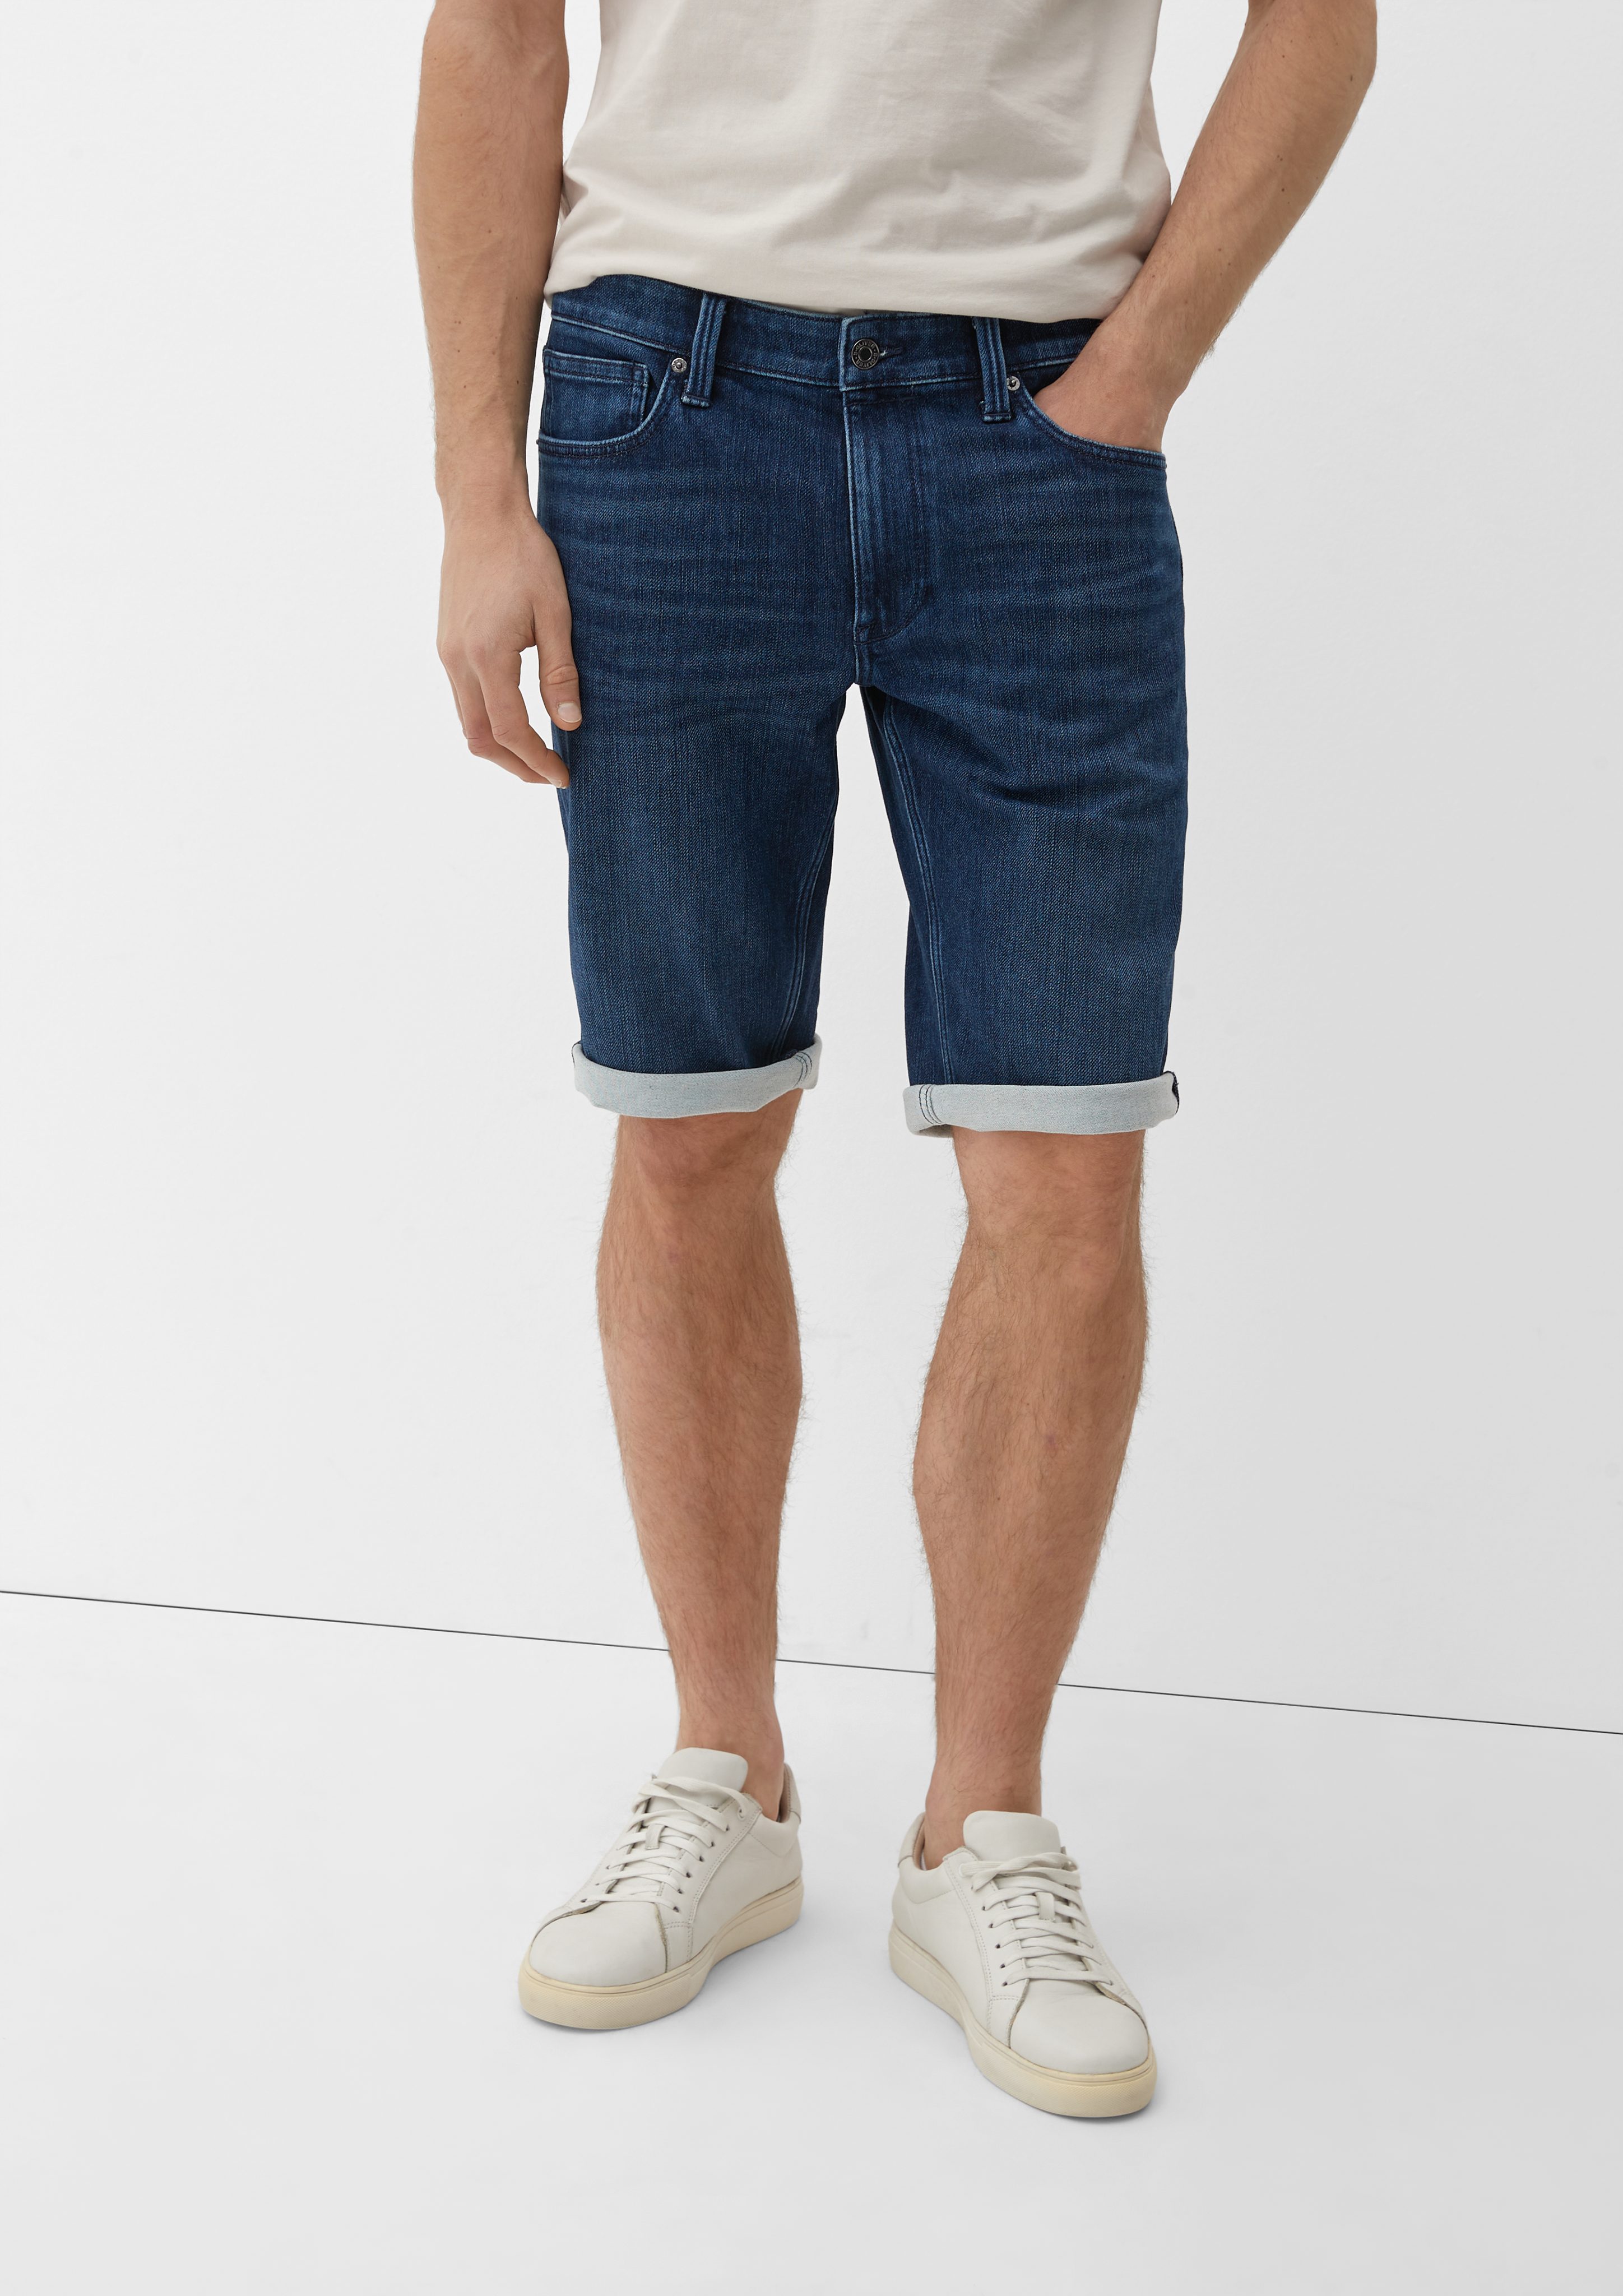 Straight / Jeansshorts Waschung Mid Regular / Leg Jeans-Shorts s.Oliver / Rise Fit